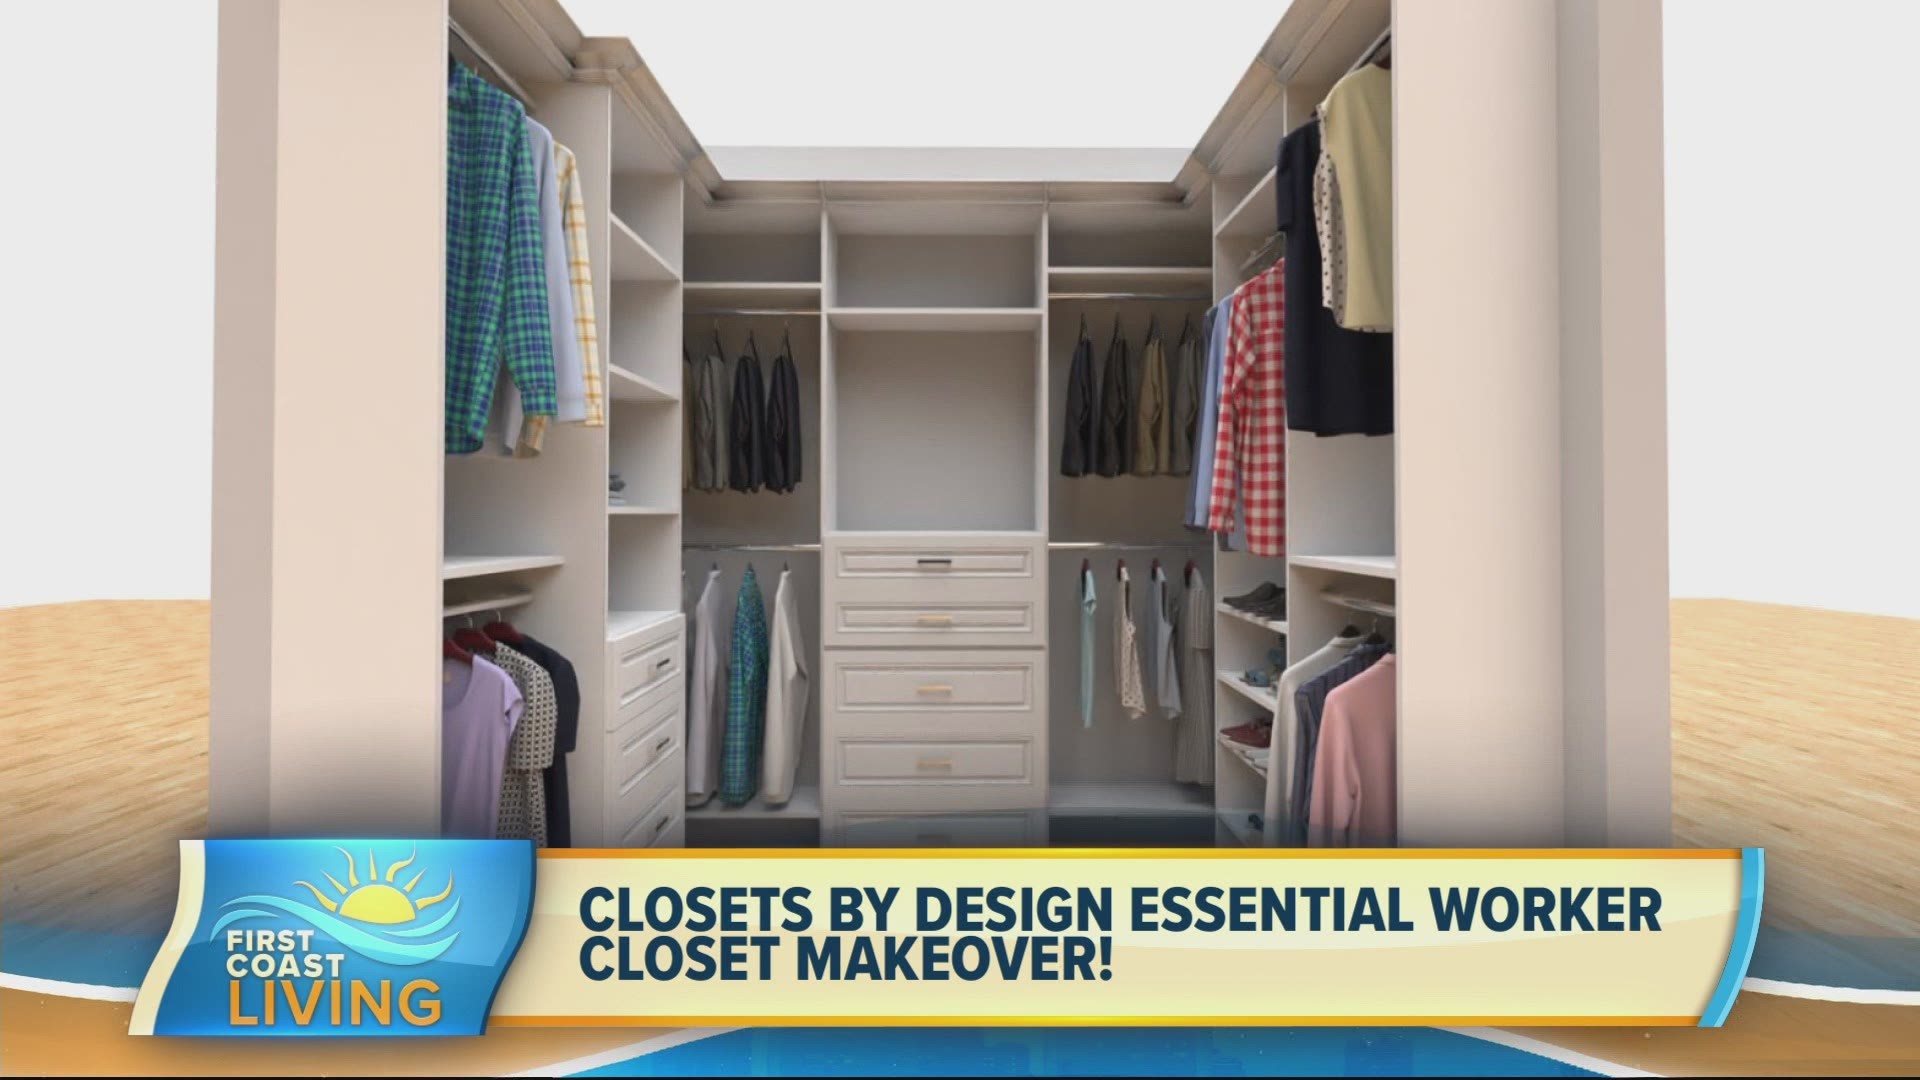 Closets by Design found a way to give back to a local essential worker with a closet makeover.